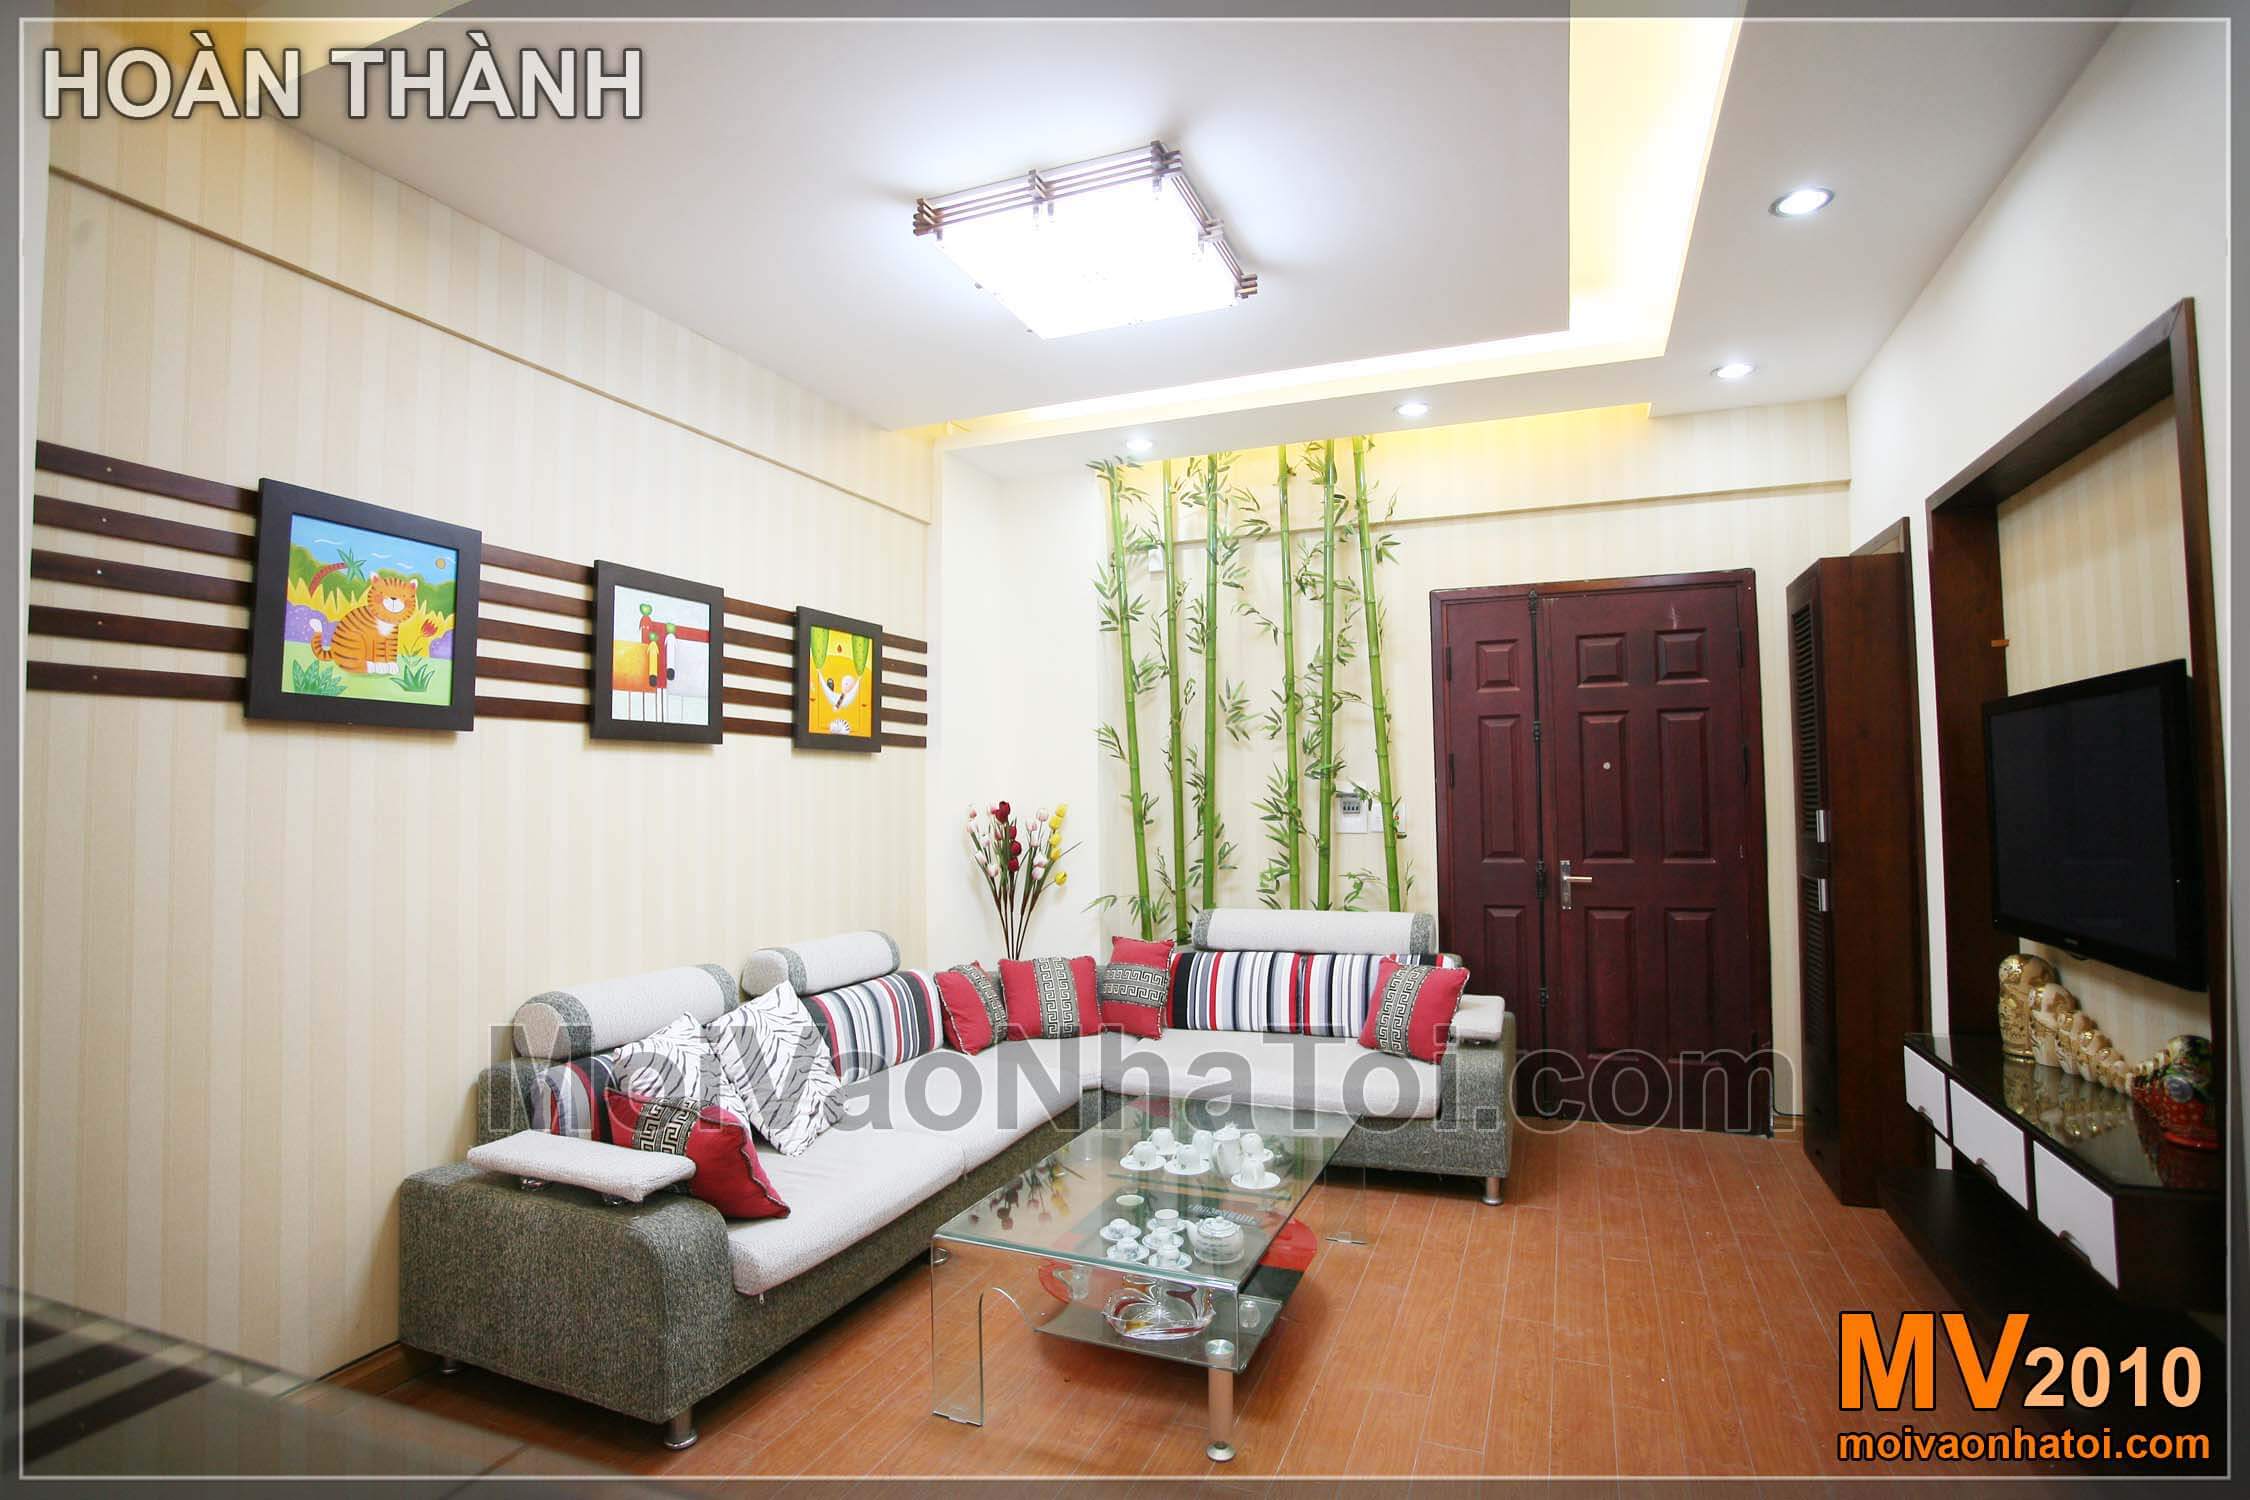 overall Viet Hung apartment living room